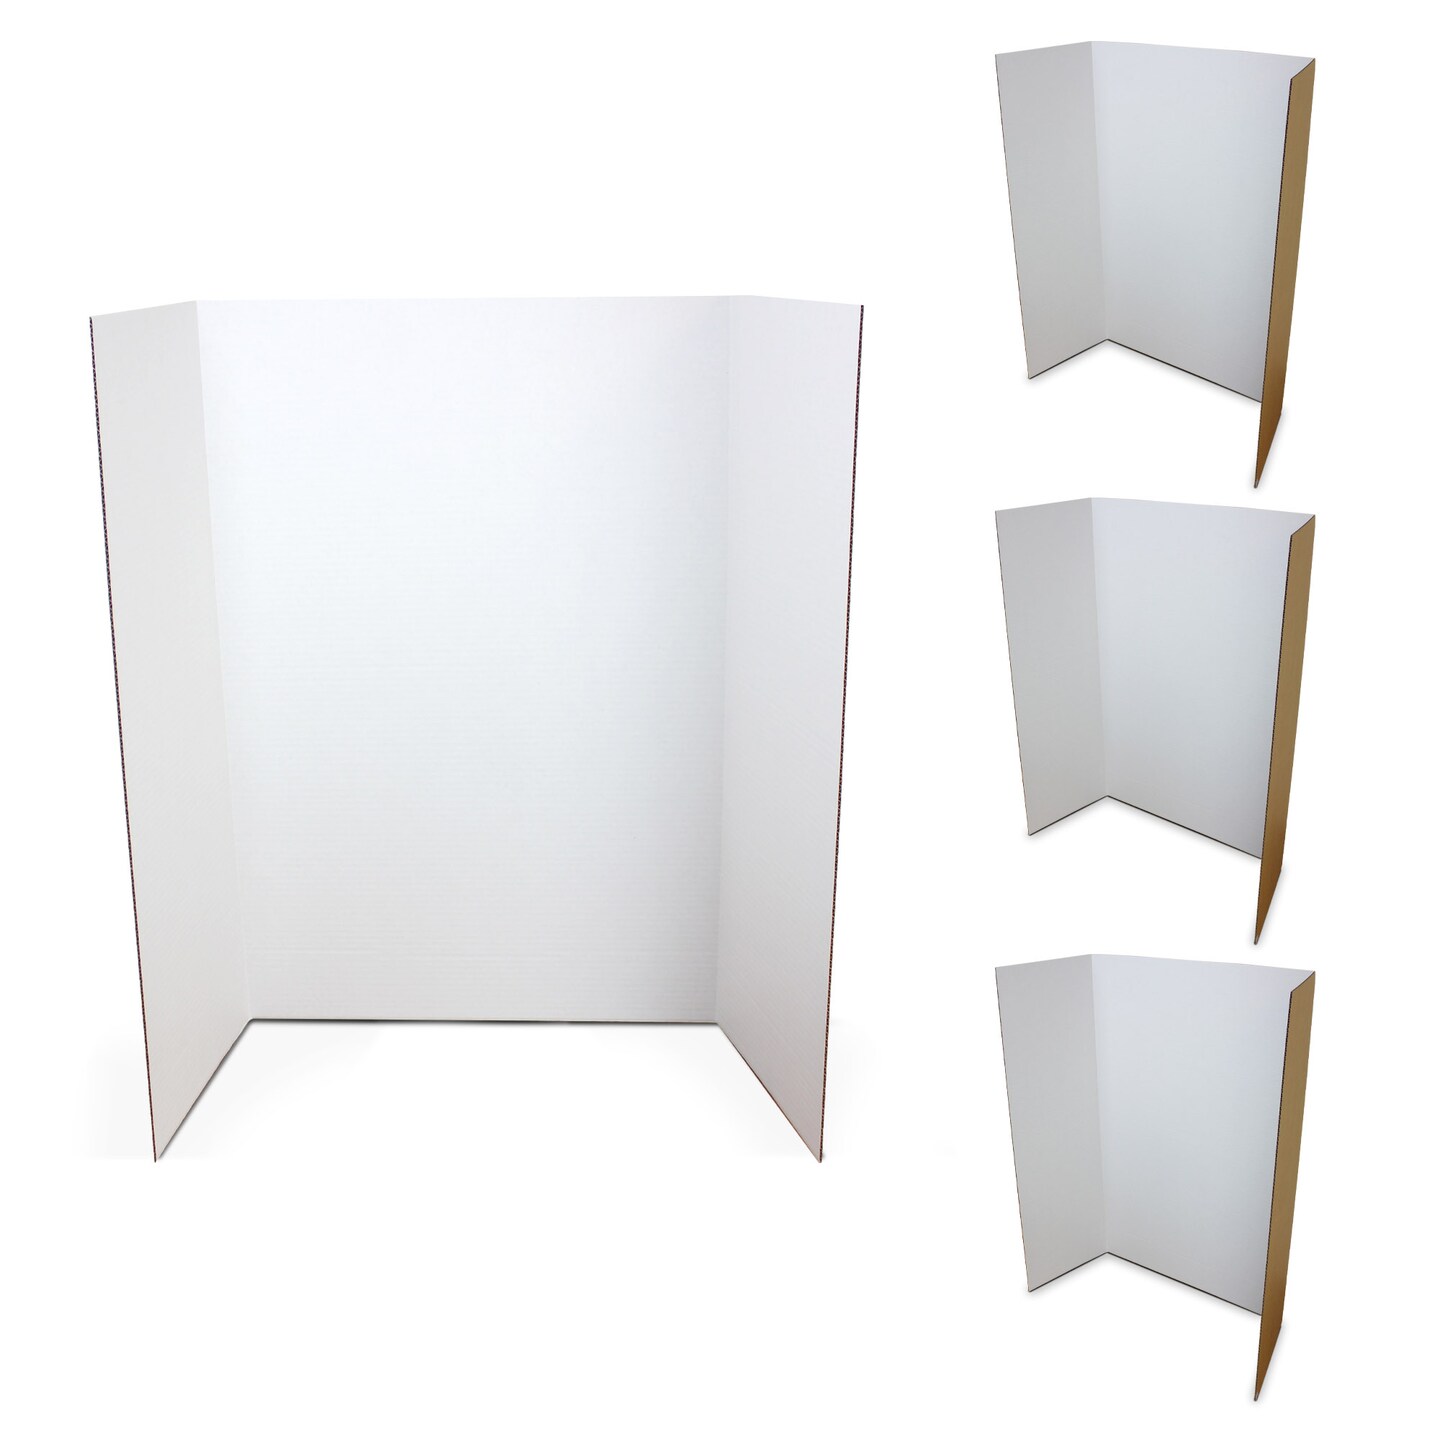 Flipside Products 36&#x201D; x 48&#x201D; Project Boards for Presentations, Science Fair, School Projects, Event Displays and Trifold Picture Board, Proudly Made in USA - 4 Pack